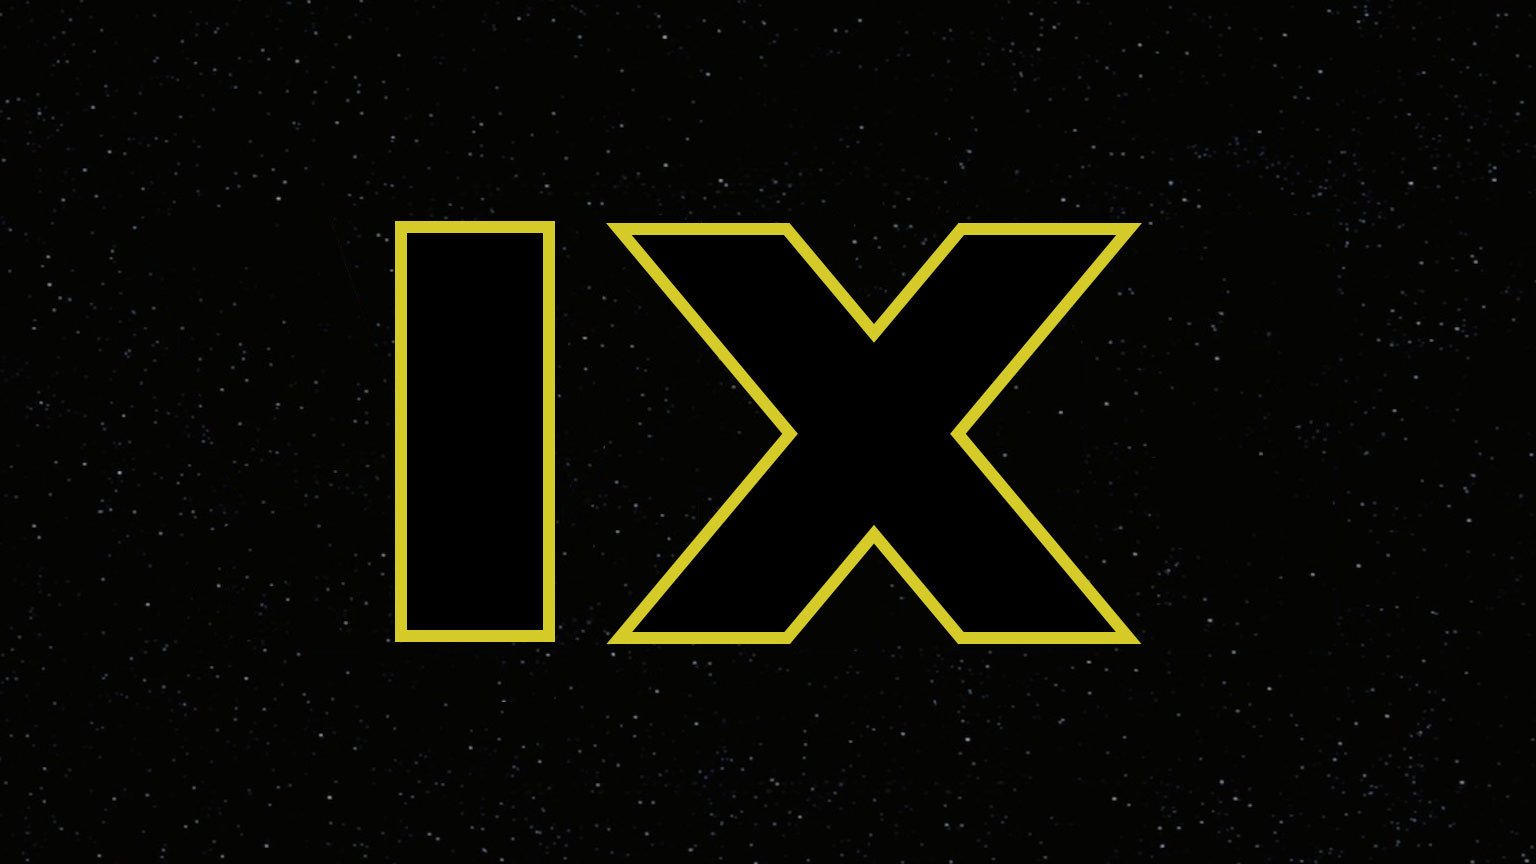 Disney Announces Release Dates for Star Wars: Episode IX and Indiana Jones Movies!